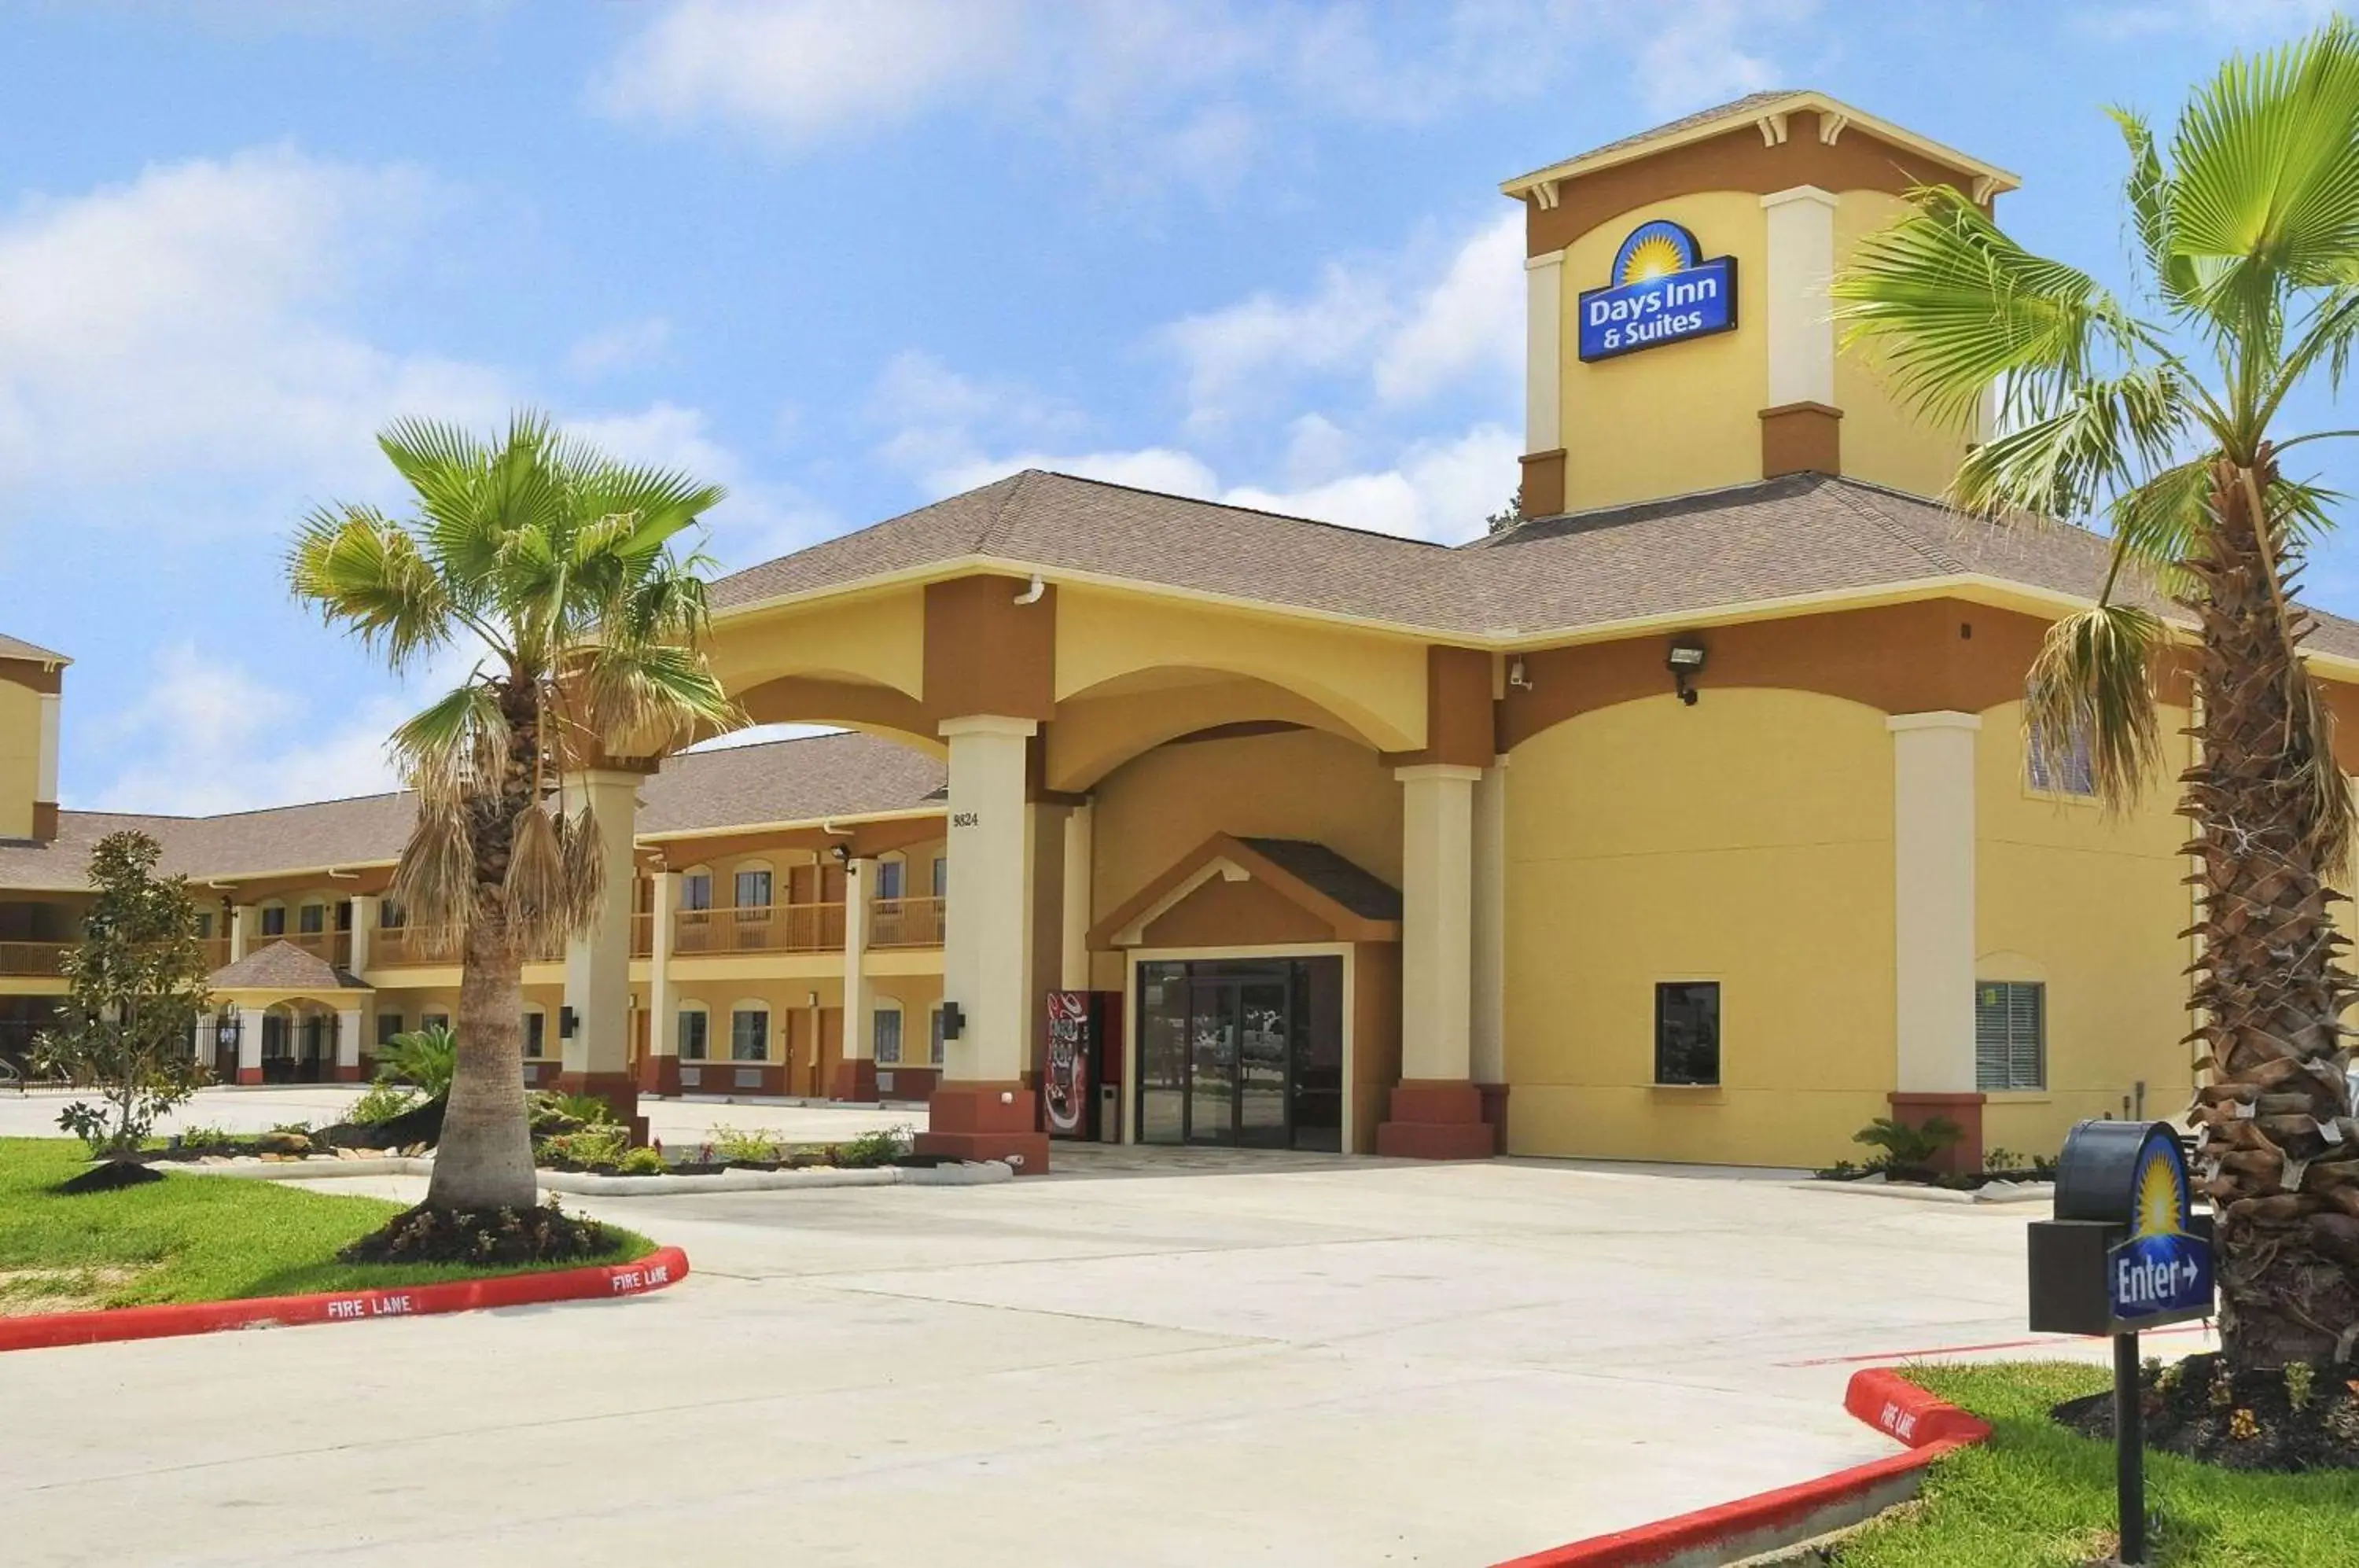 Property Building in Days Inn by Wyndham Humble/Houston Intercontinental Airport